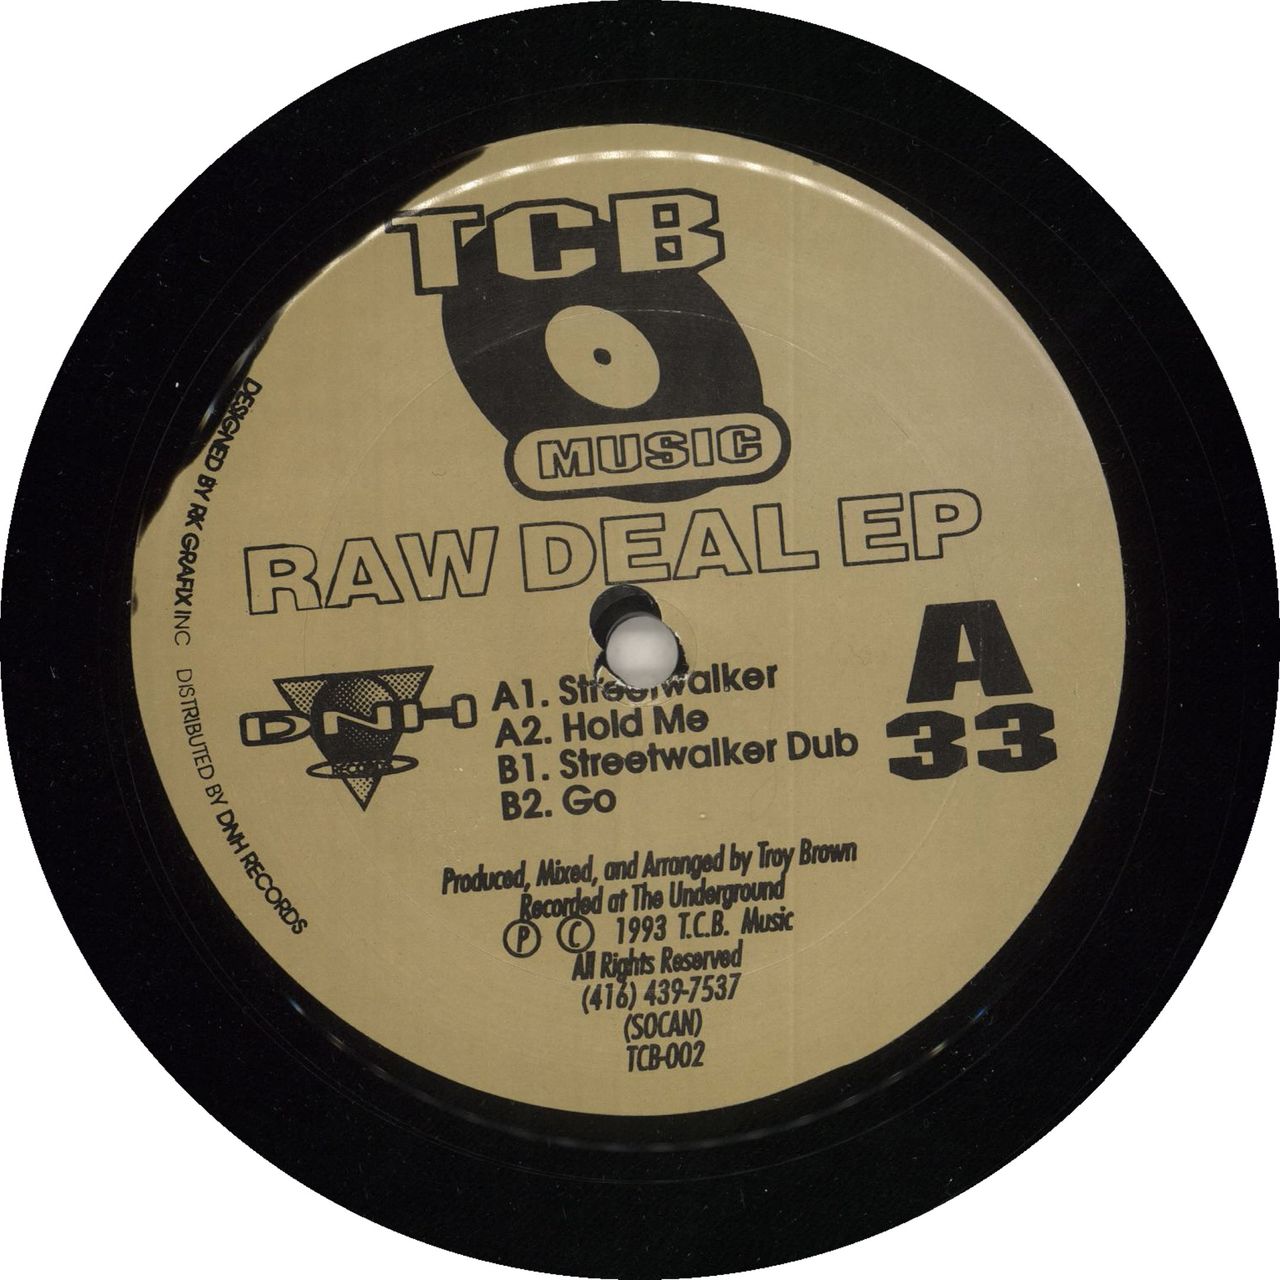 TCB Records (5) Label, Releases